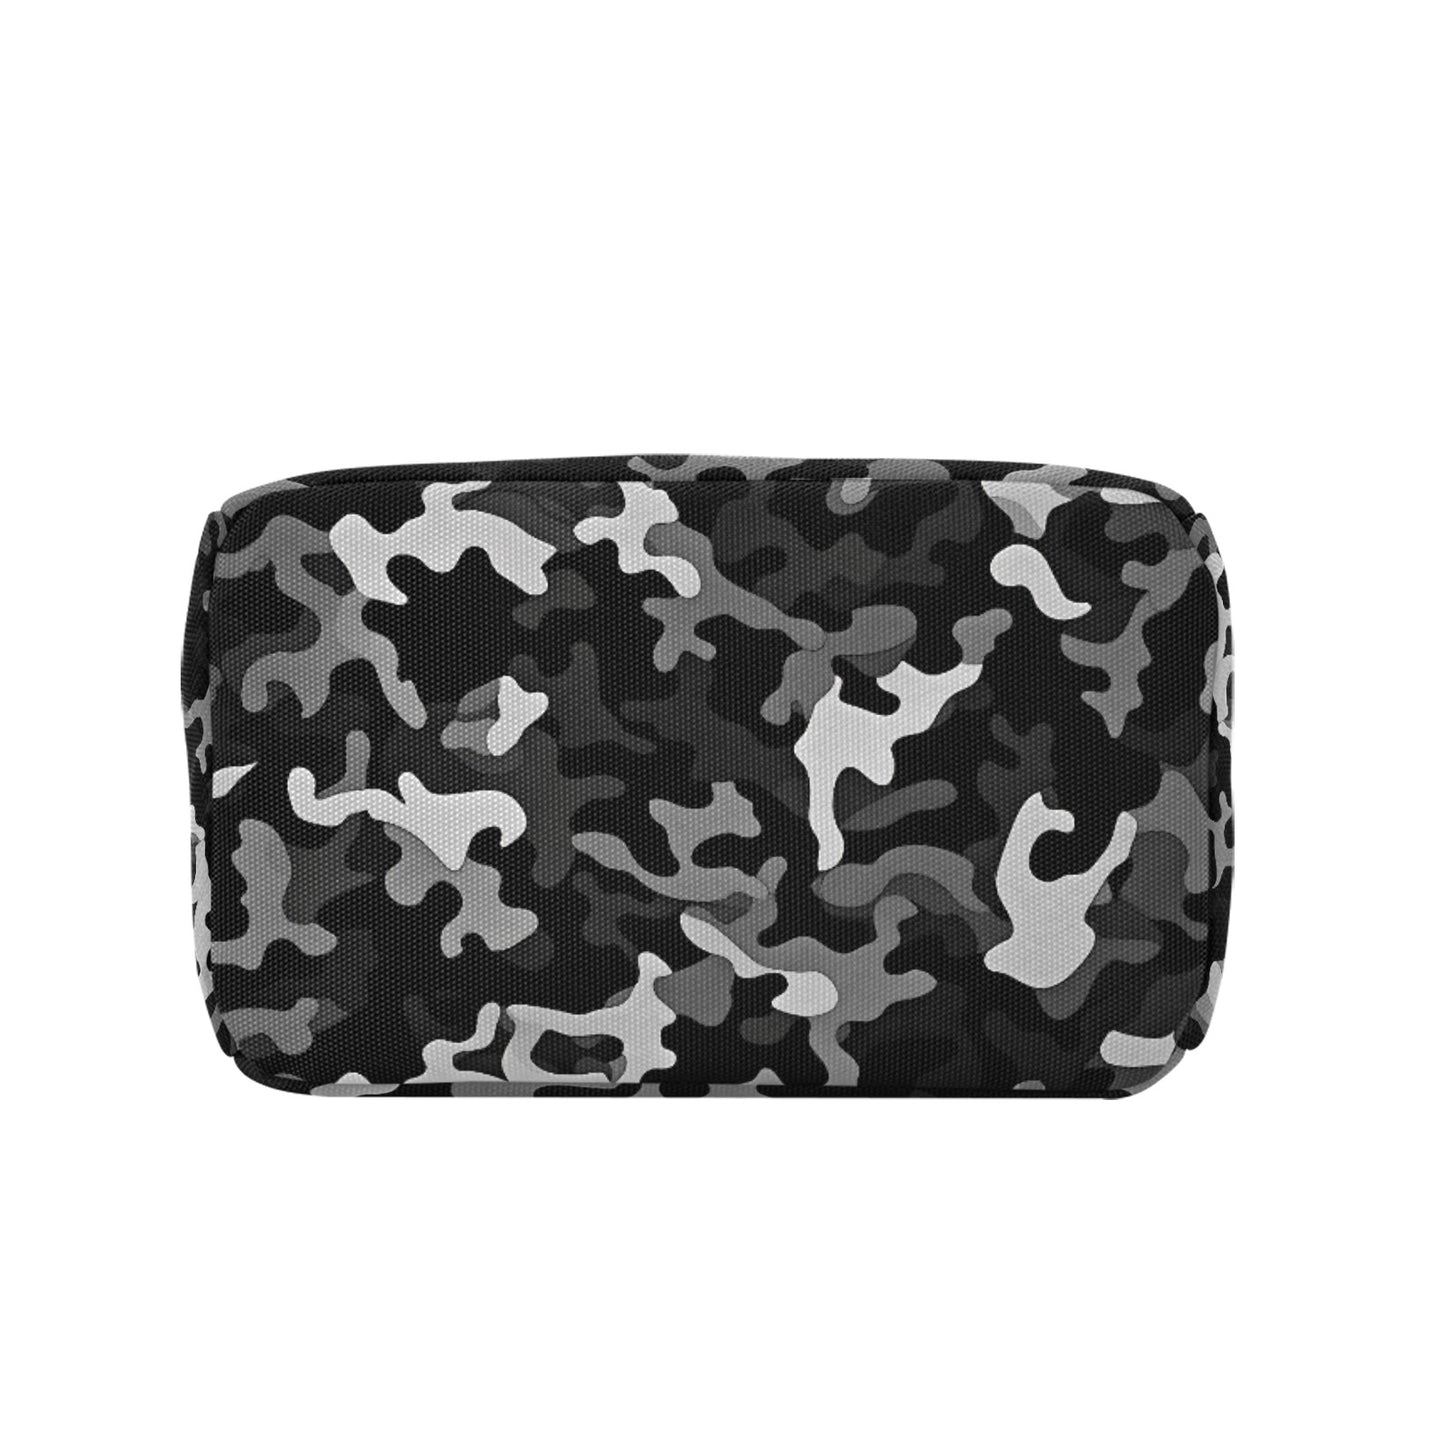 Insulated Zipper Lunch Bag-Black Camouflage